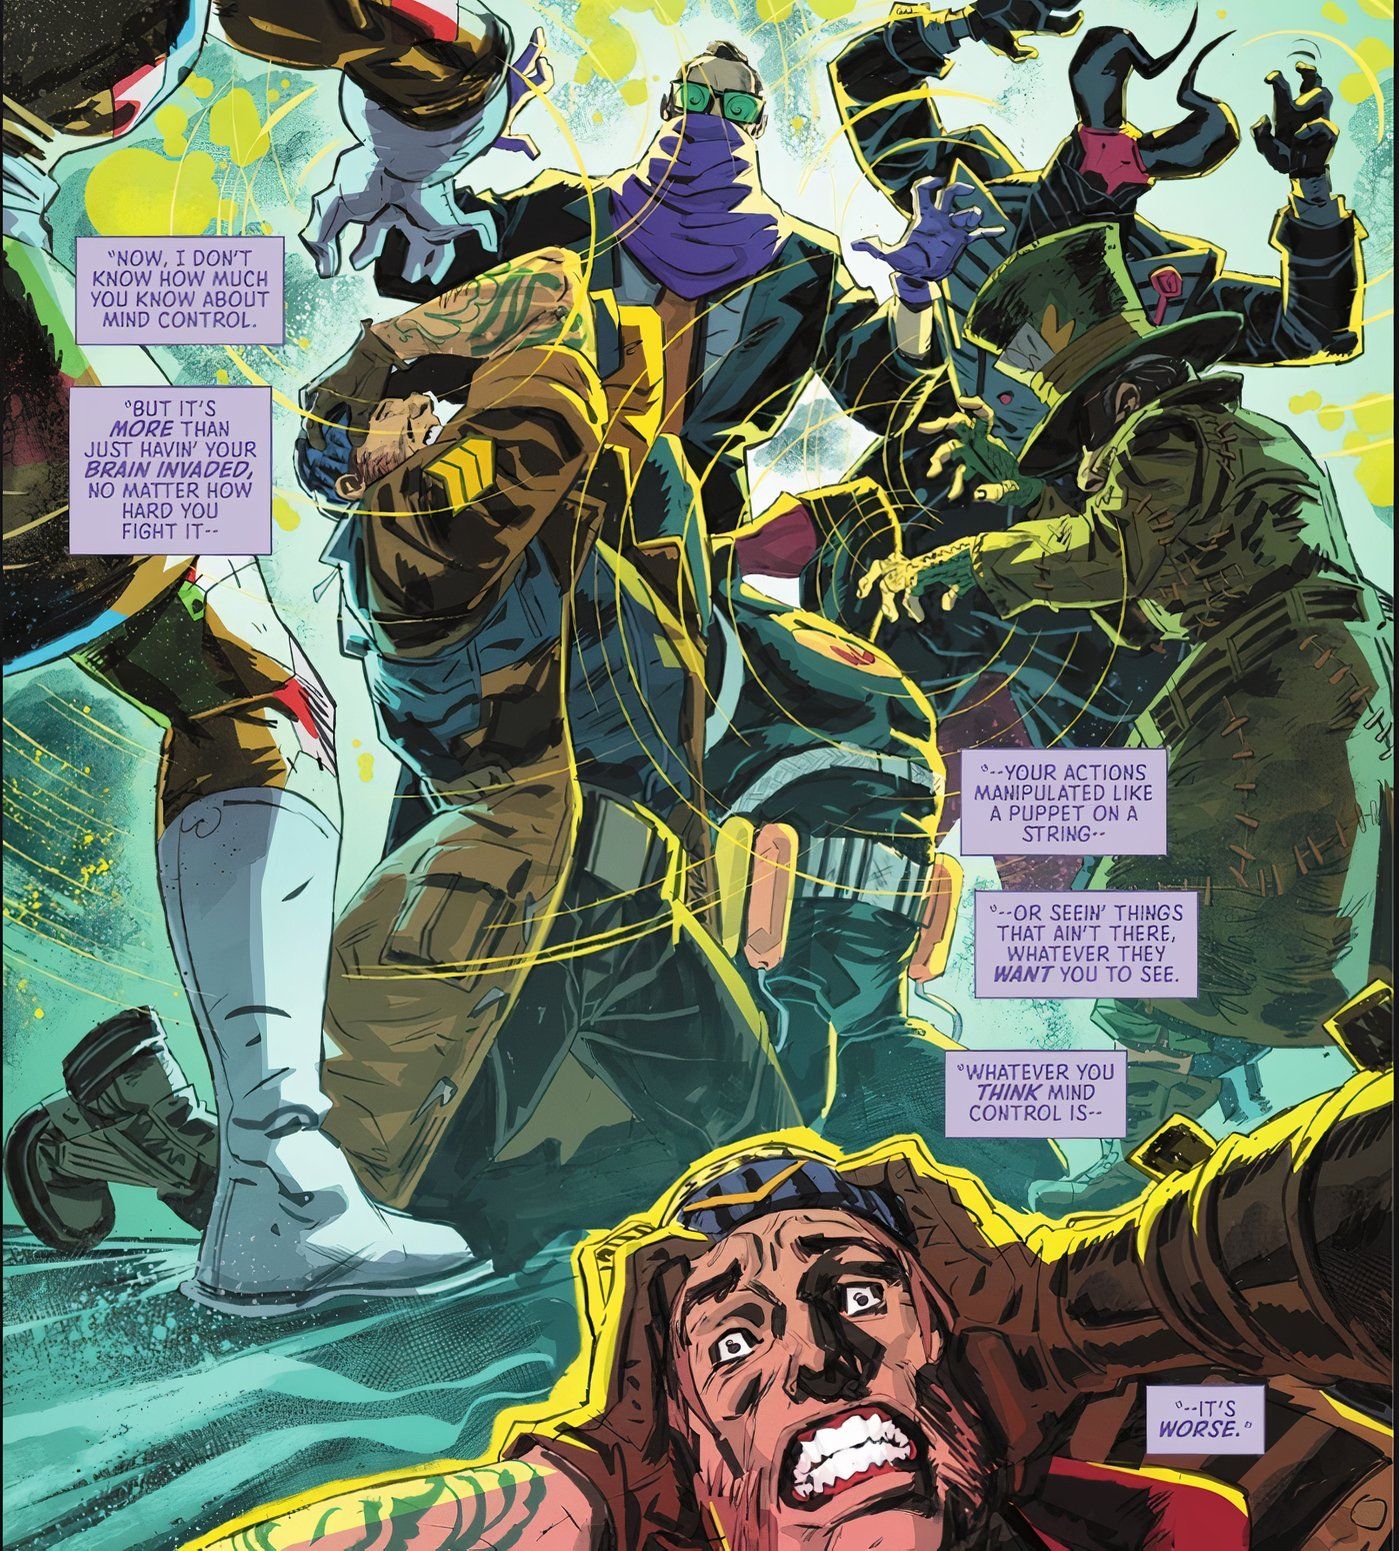 Suicide Squad Kill Arkham Asylum #4 Captain boomerang getting mind controlled by various villains 